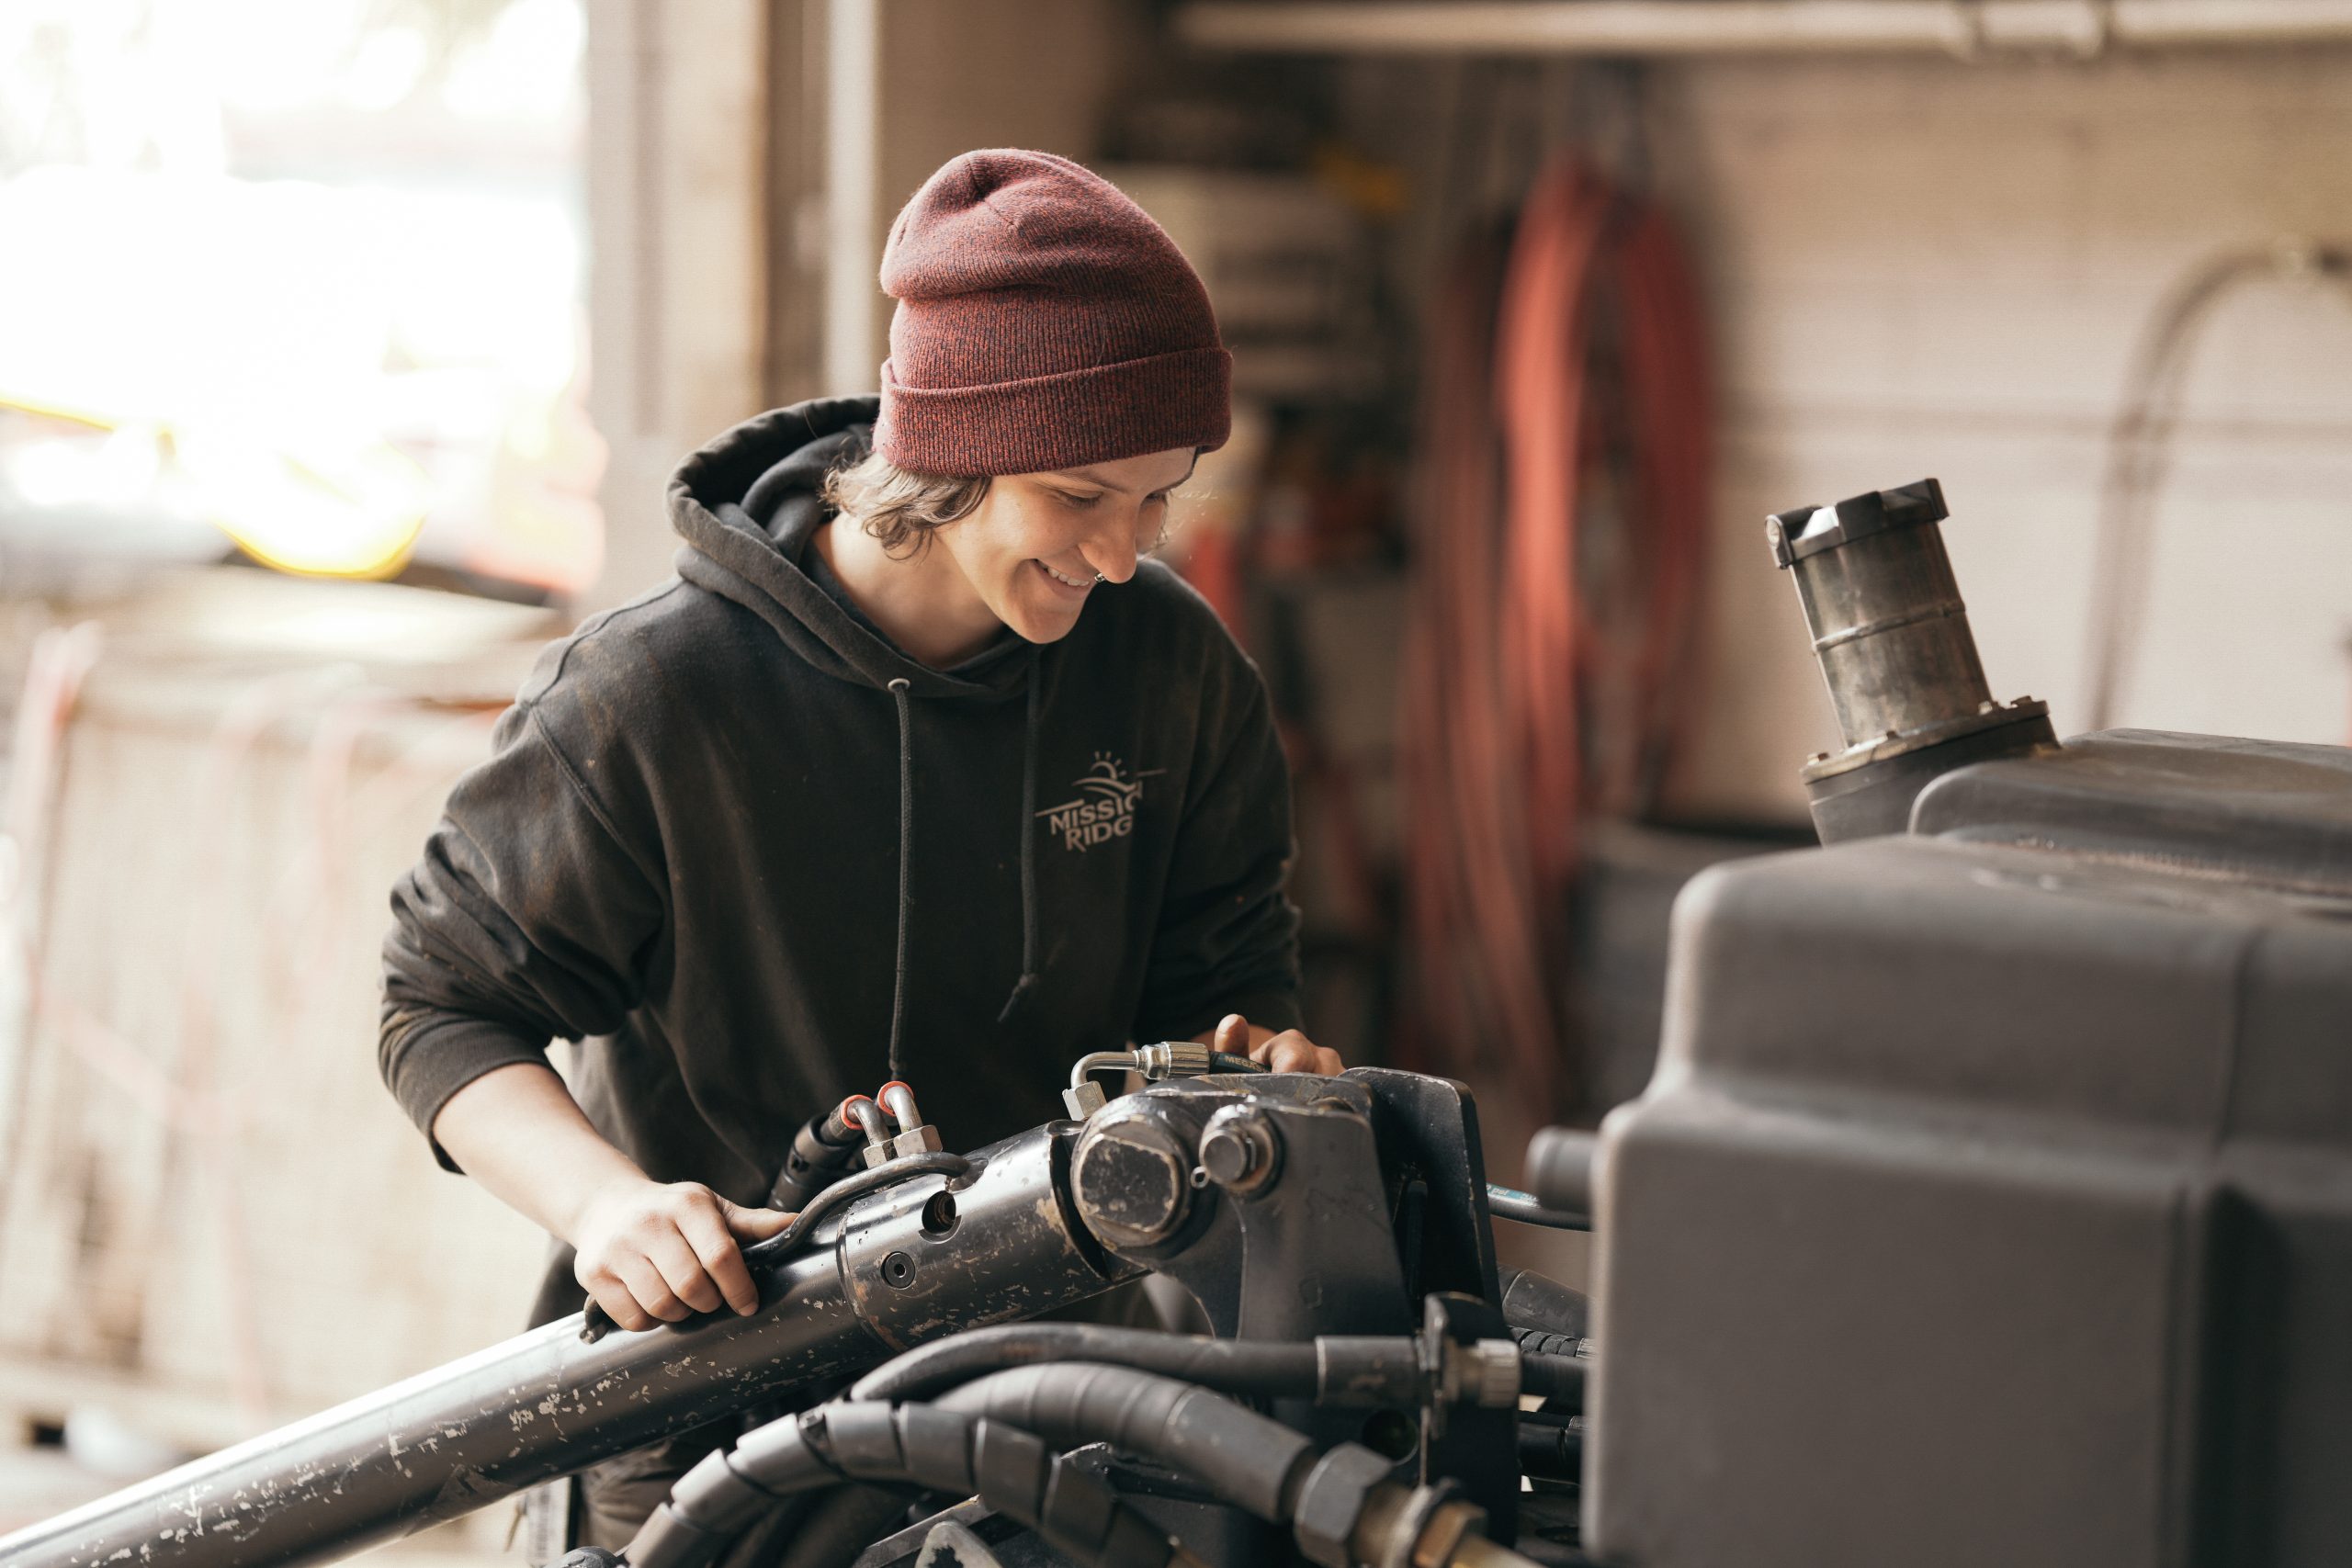 Vehicle mechanic smilign while working on a snow cat engine